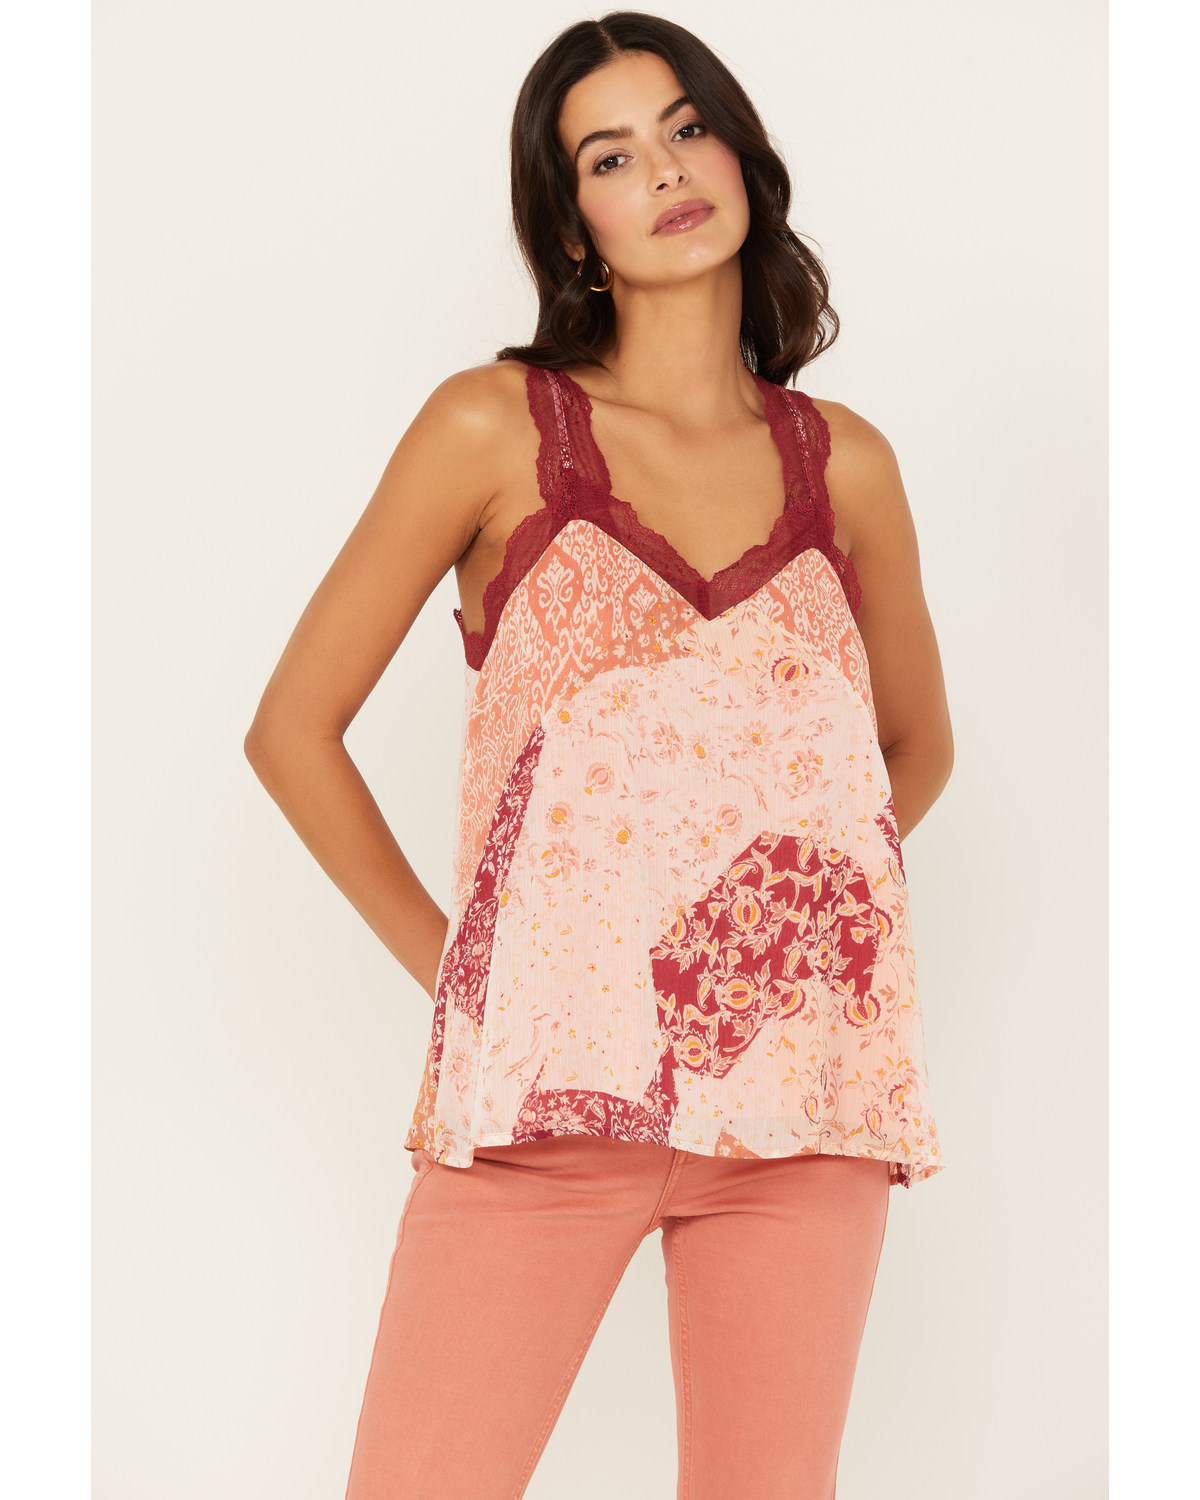 Miss Me Women's Floral Sleeveless Top